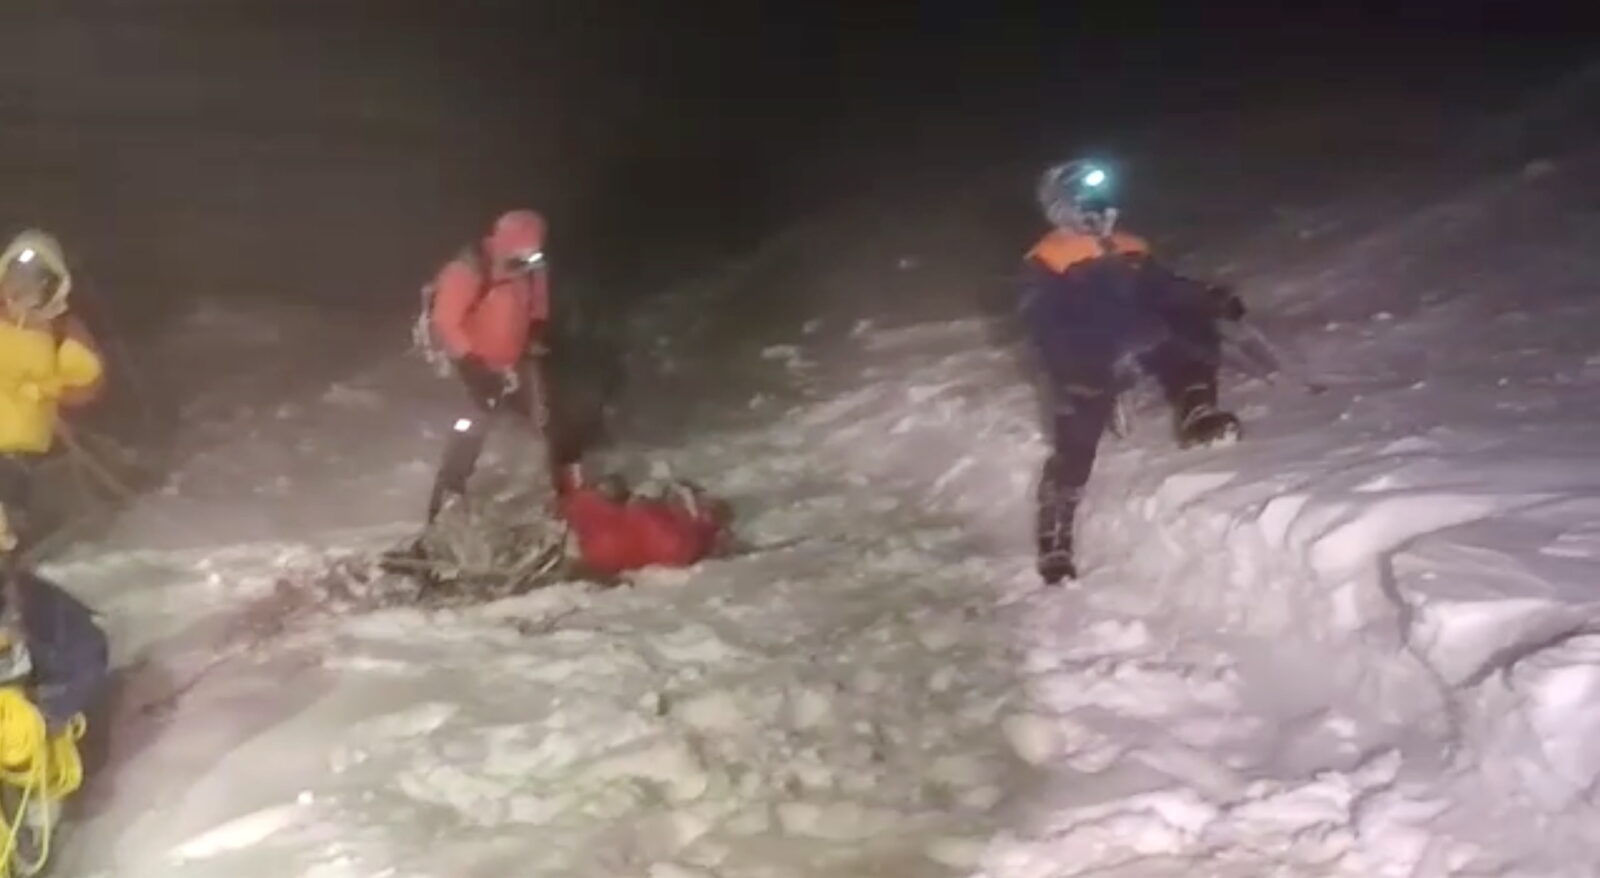 Members of Russia's Emergencies Ministry conduct a rescue operation on the slope of Mount Elbrus